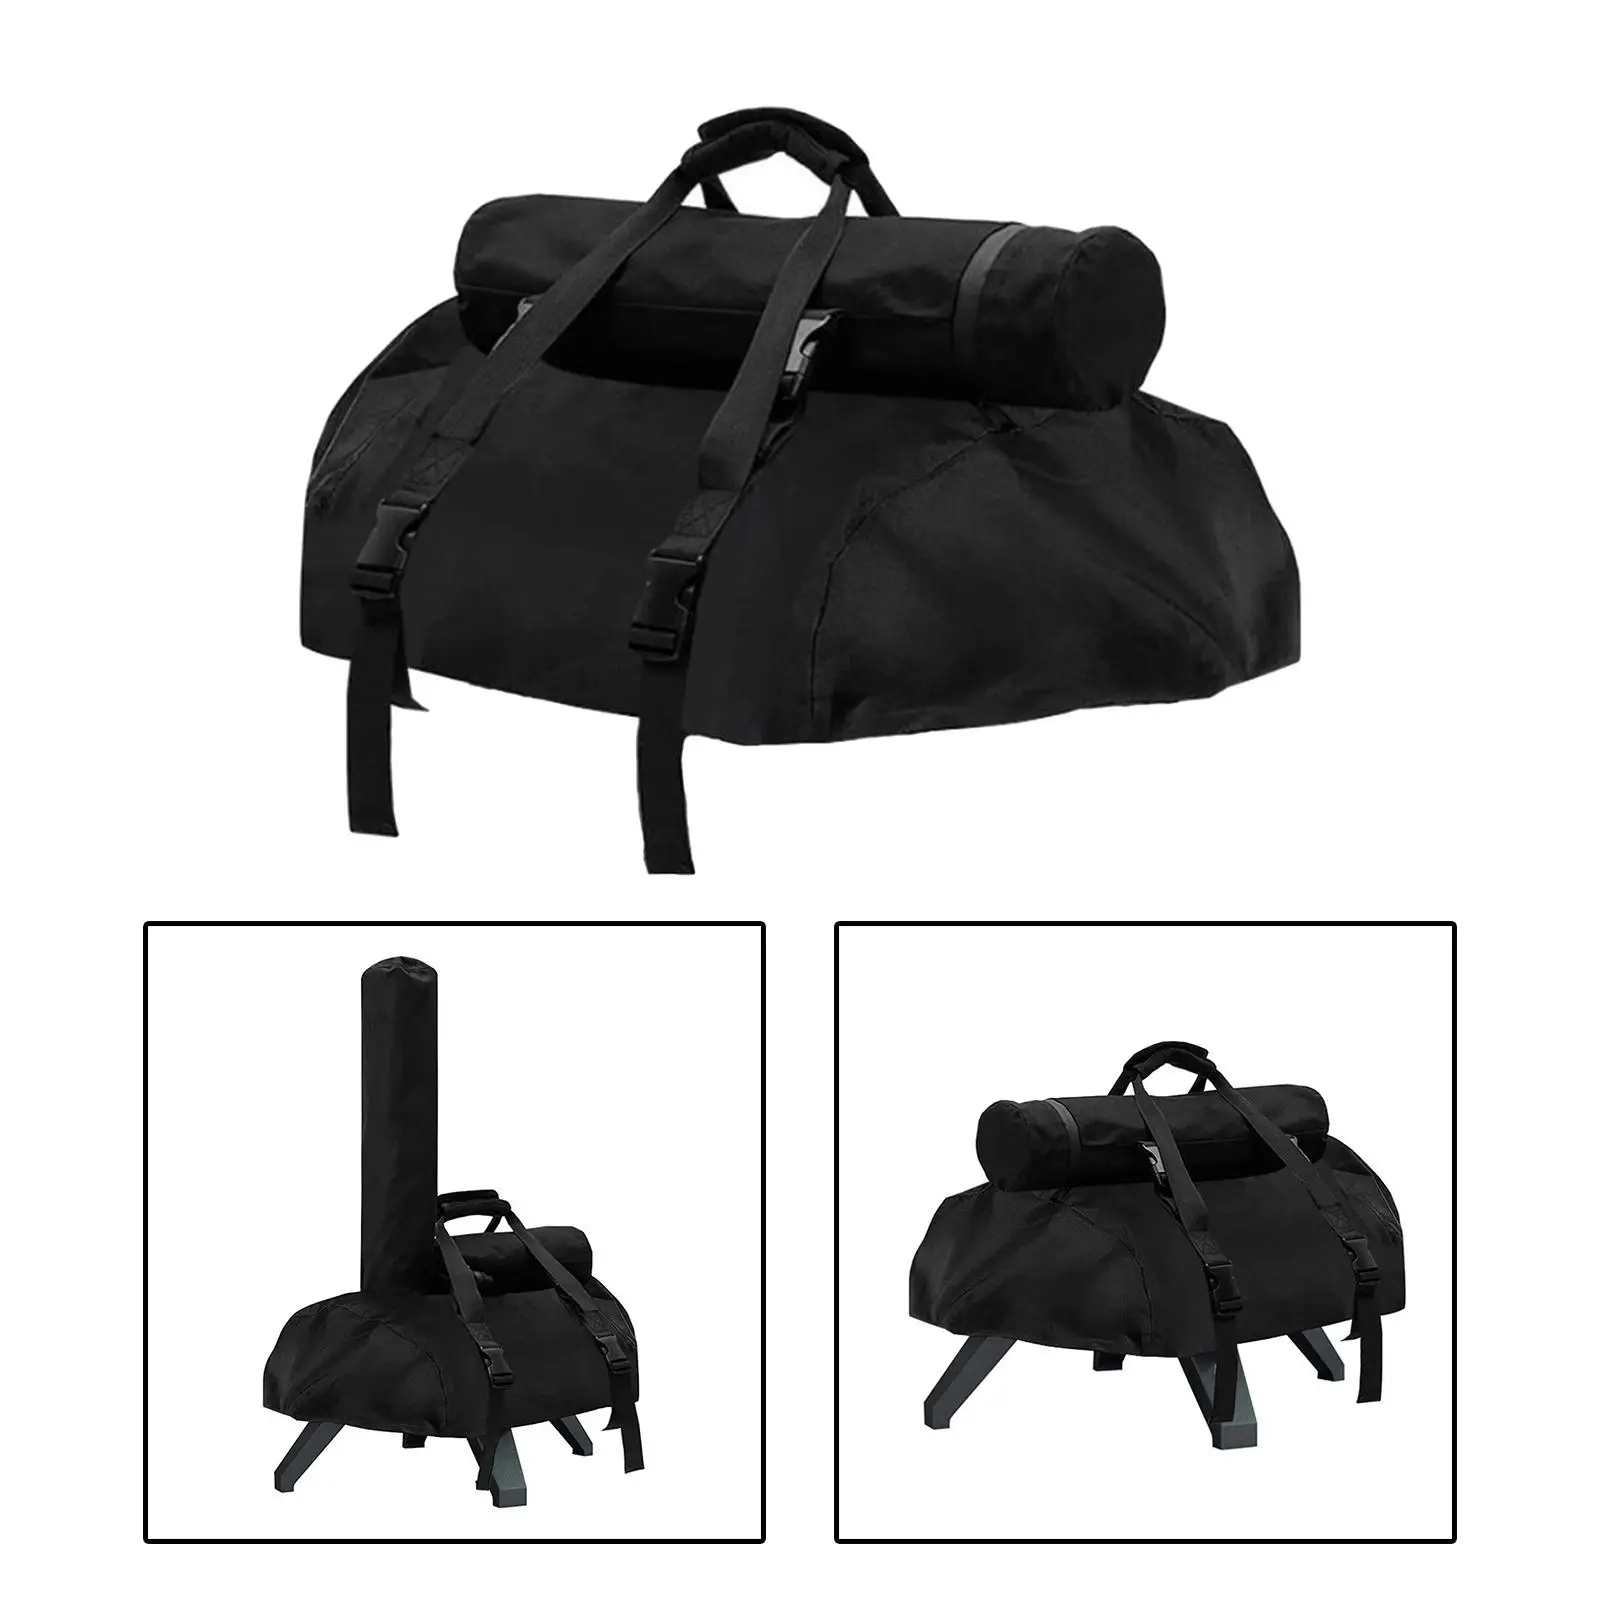 Pizza Oven Covers Heavy Duty Dustproof Protective Cover with Handle Bag Adjustable Strap Pizza Oven Cover for Barbecue Camping